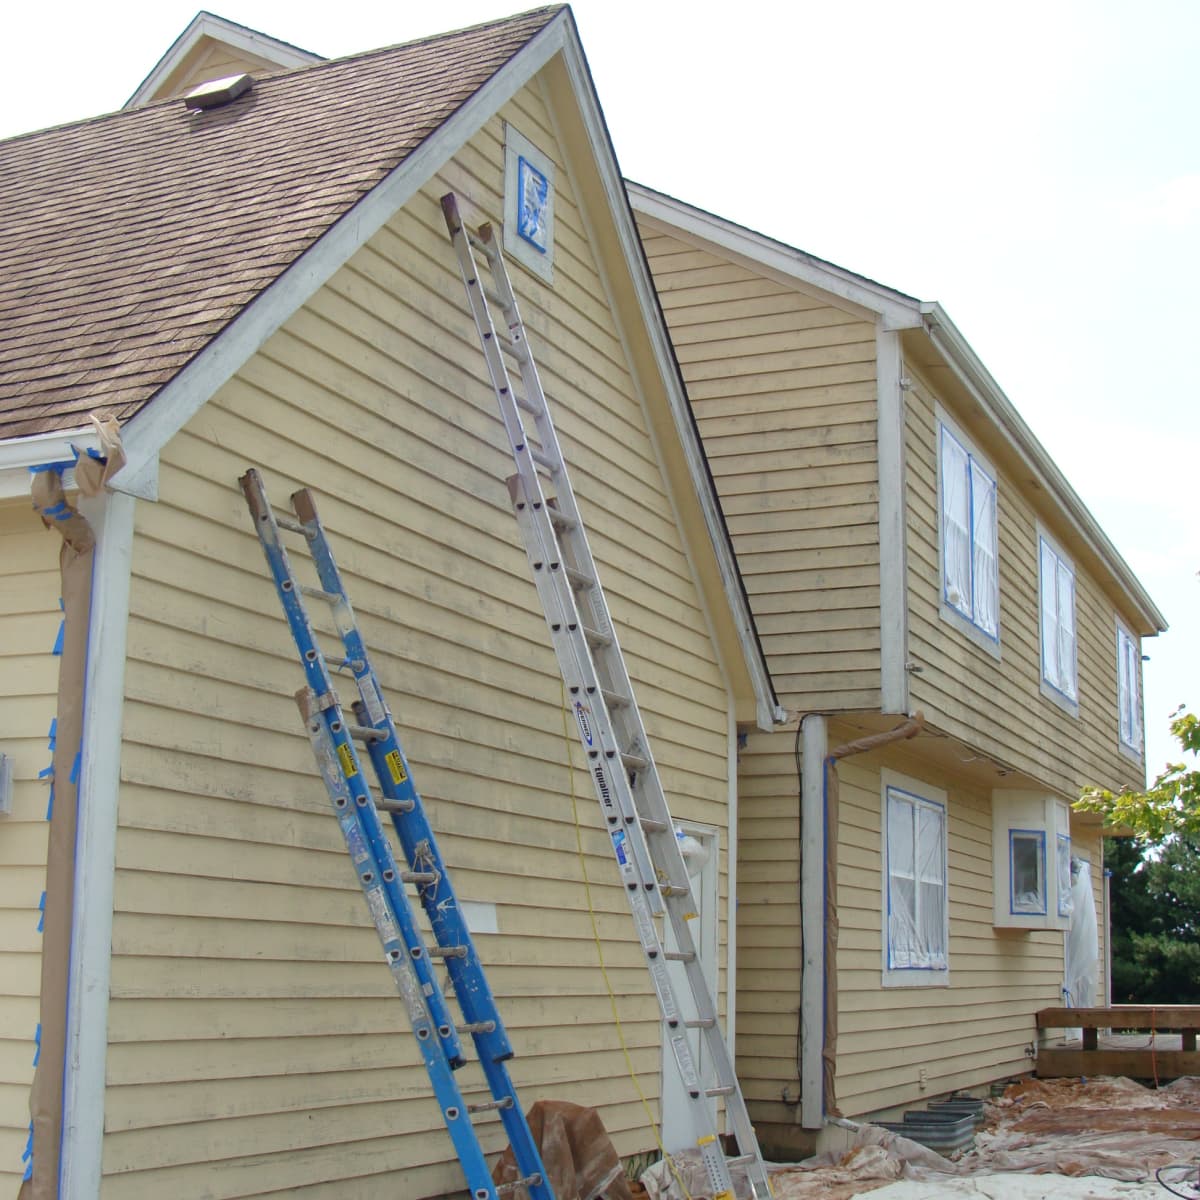 How To Stain Or Paint Cedar Shake Siding For A Pretty Finish